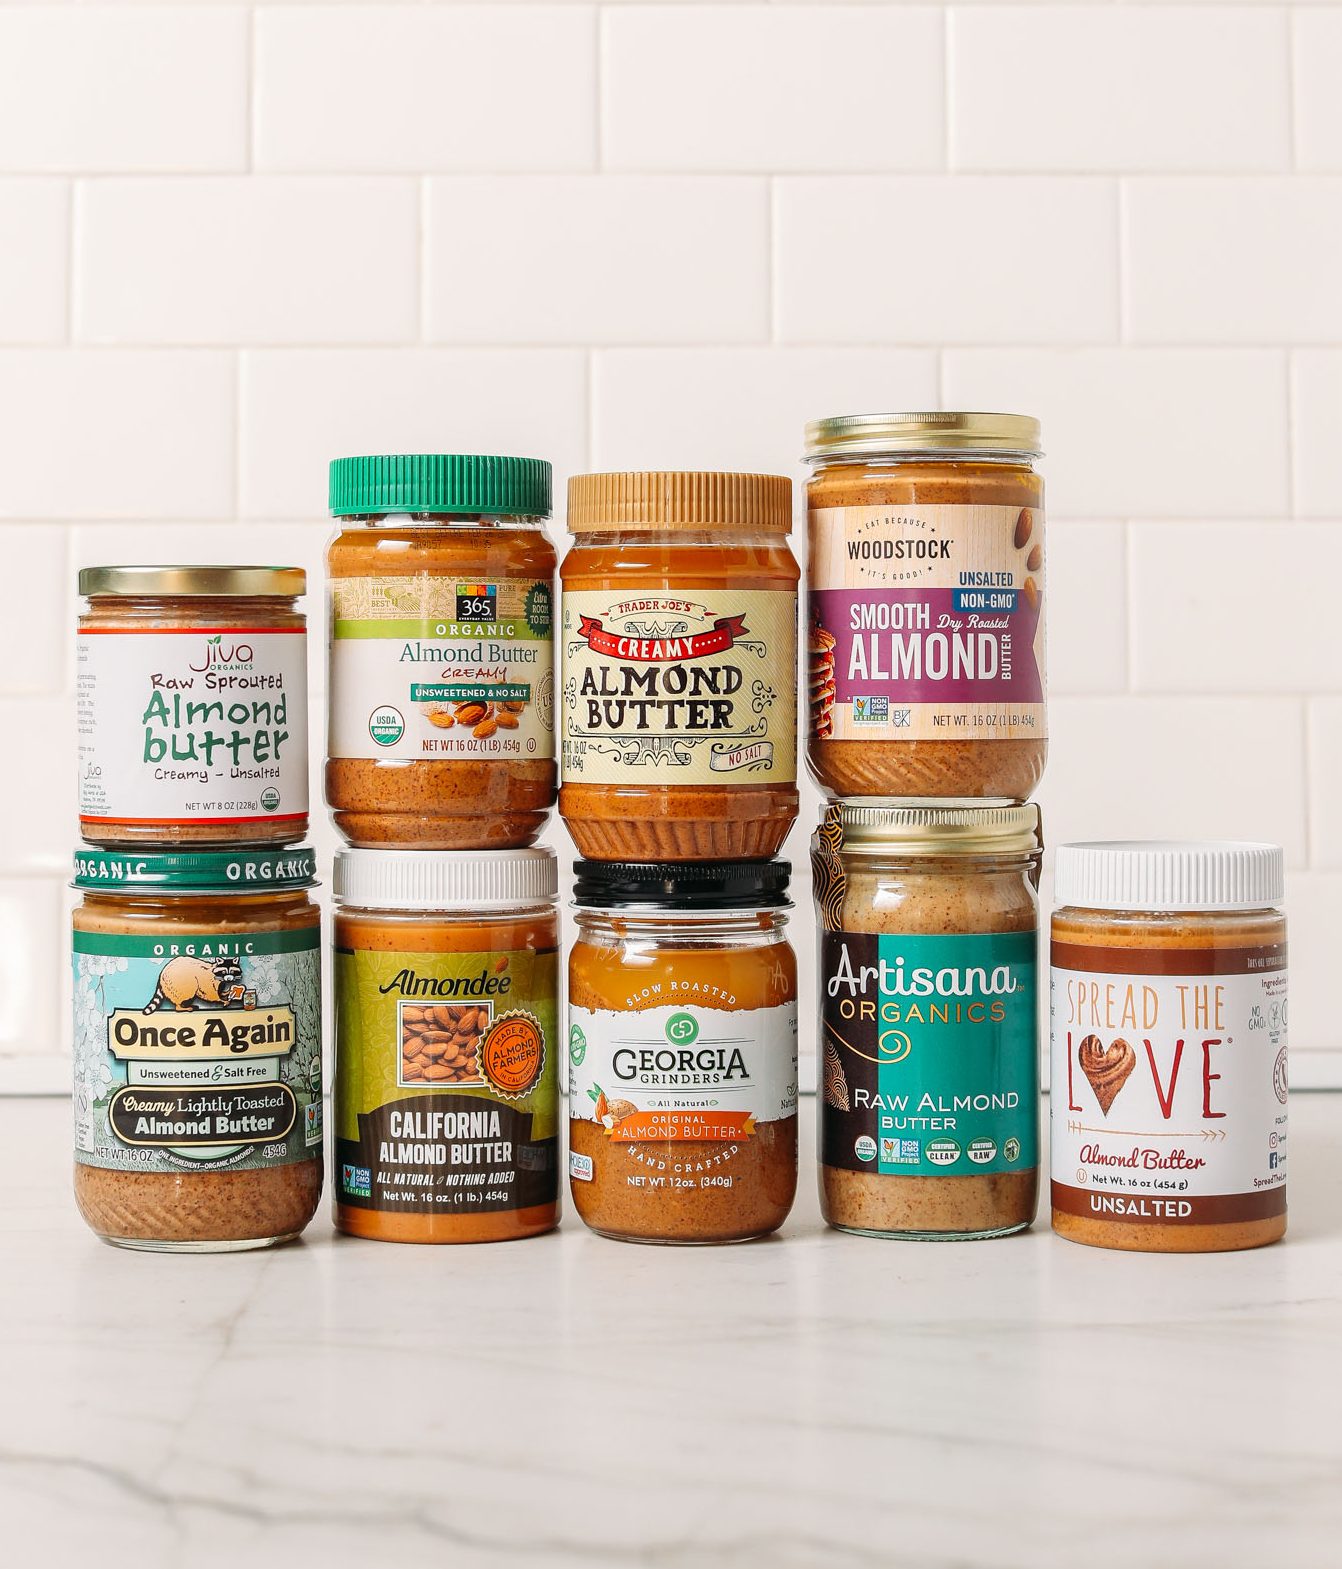 Assortment of almond butter brands for our unbiased view of popular brands